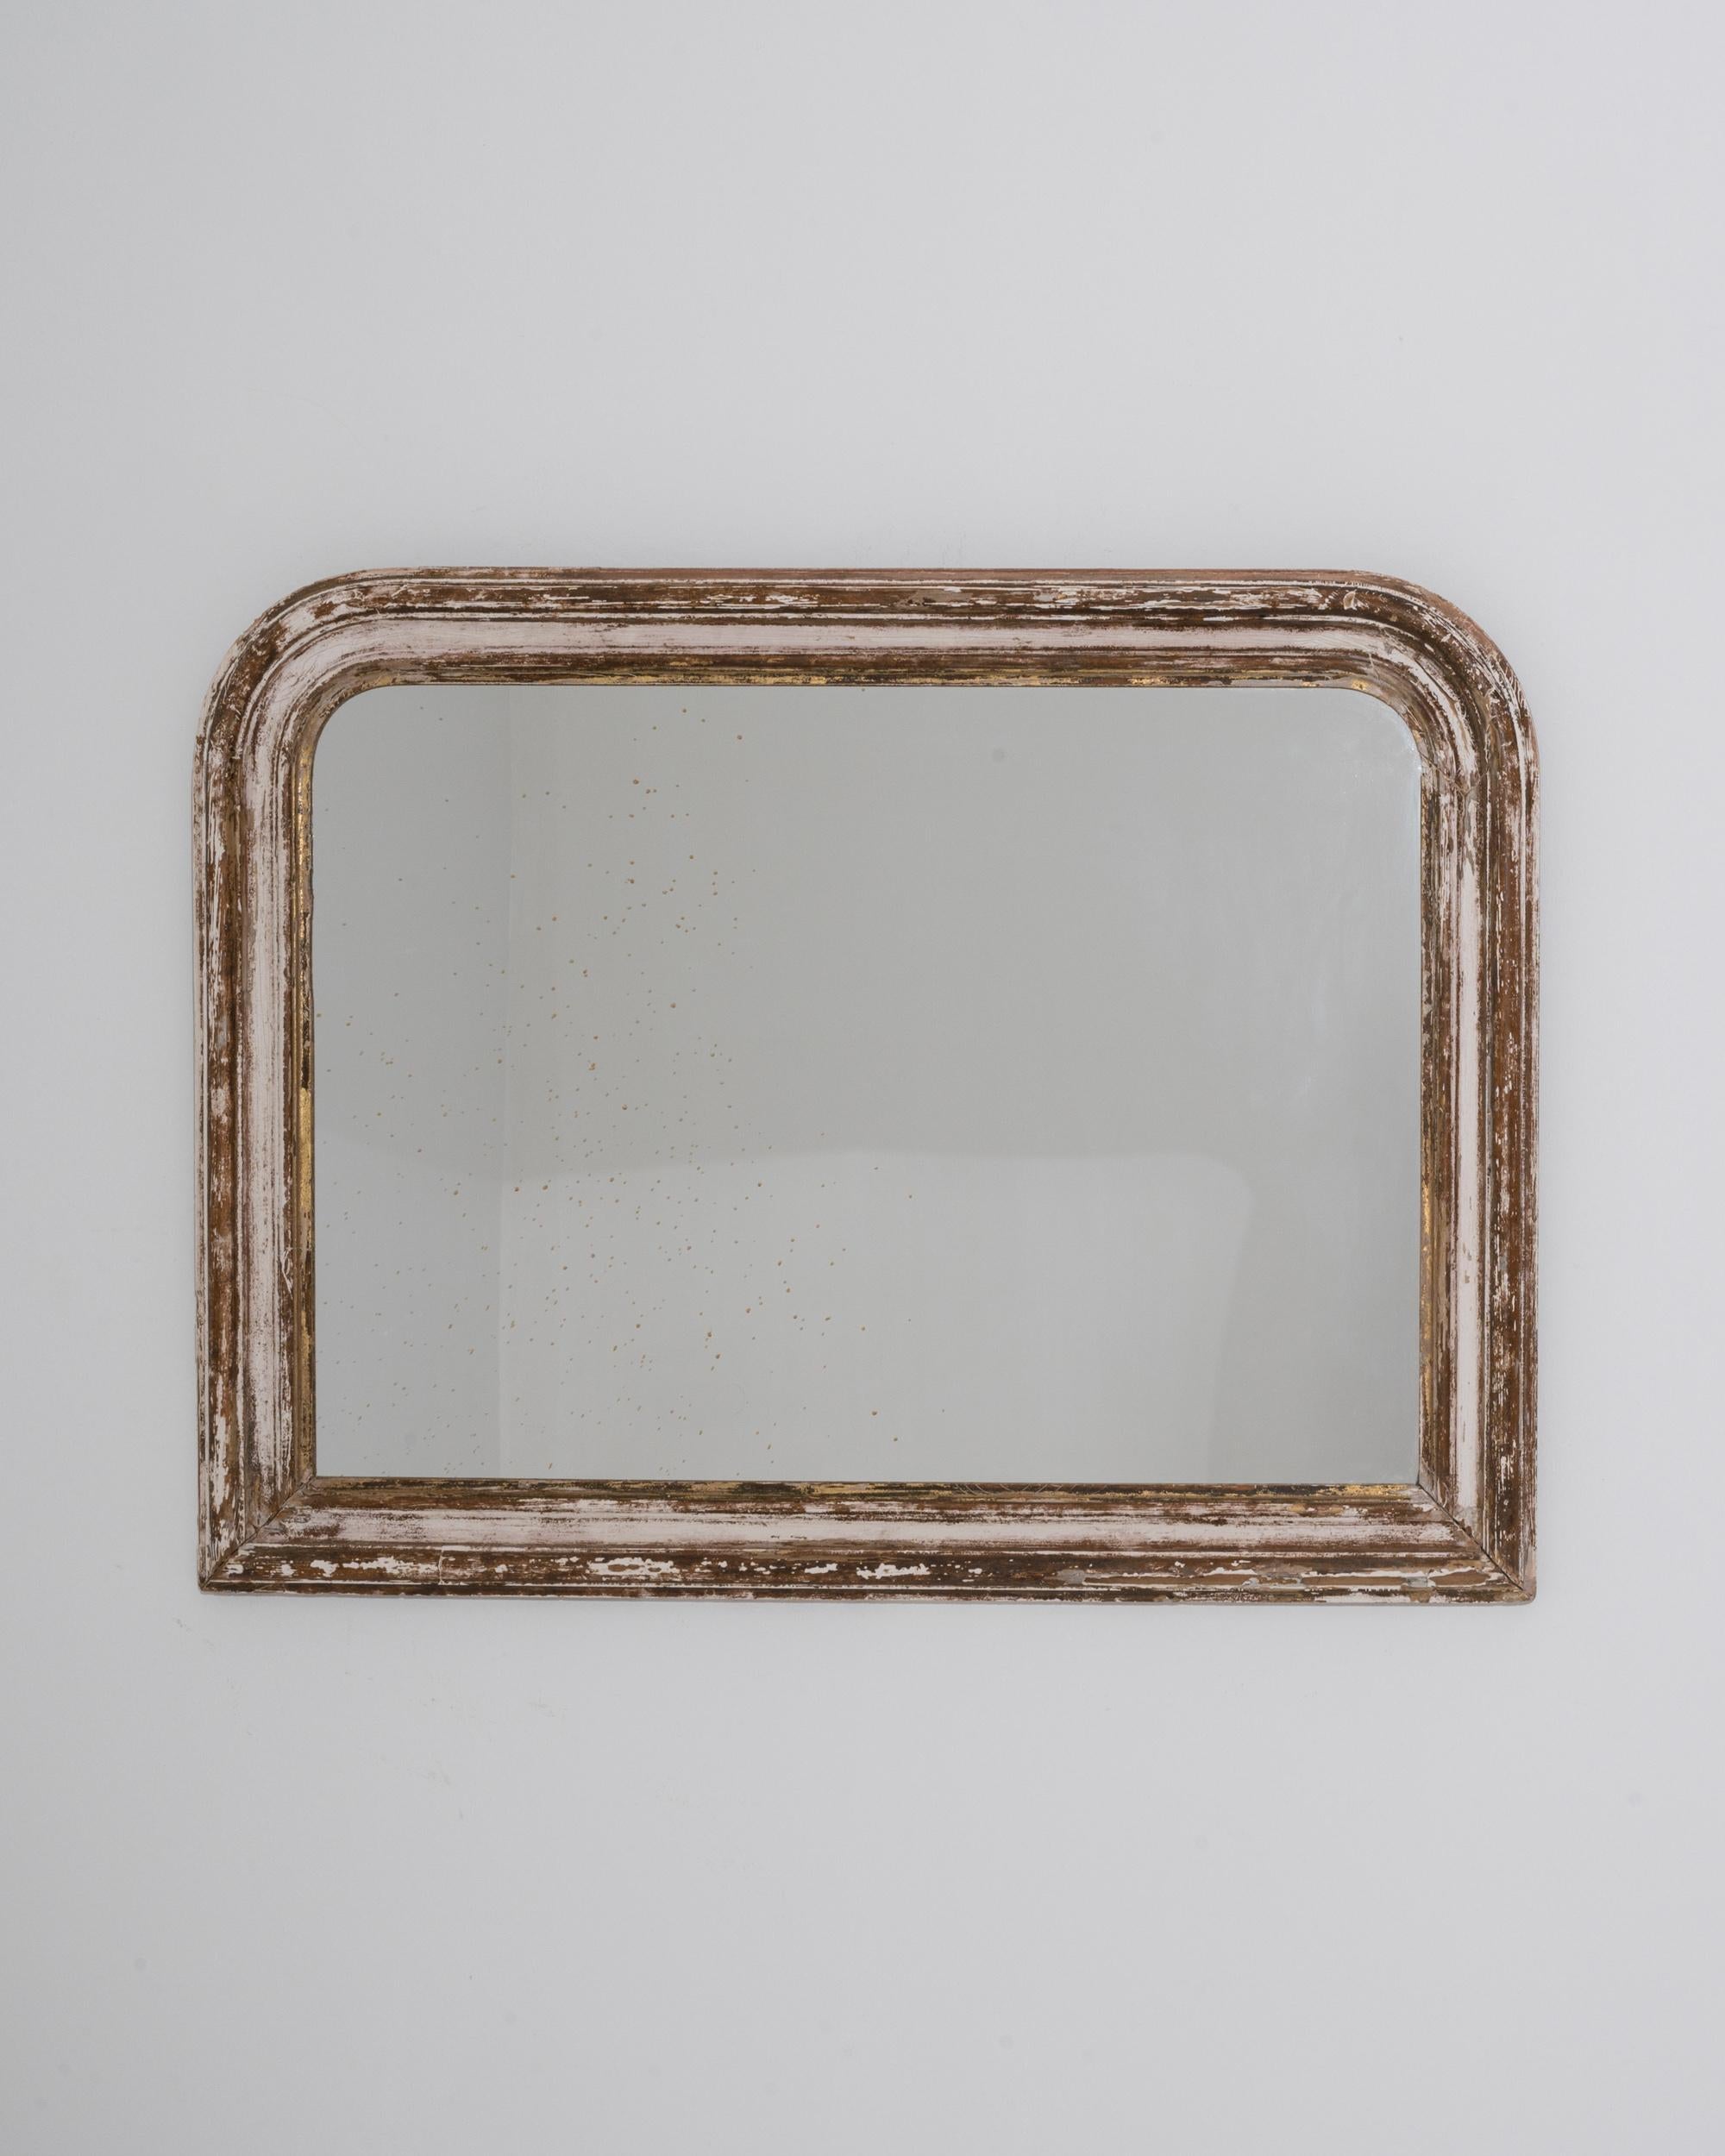 A wooden mirror made in 19th century France. This vintage mirror offers a relaxing and rustic charm to decorate the home, featuring an eye-pleasing finish and a gently rounded frame. The off-white paint that coats the surface of the frame has worn